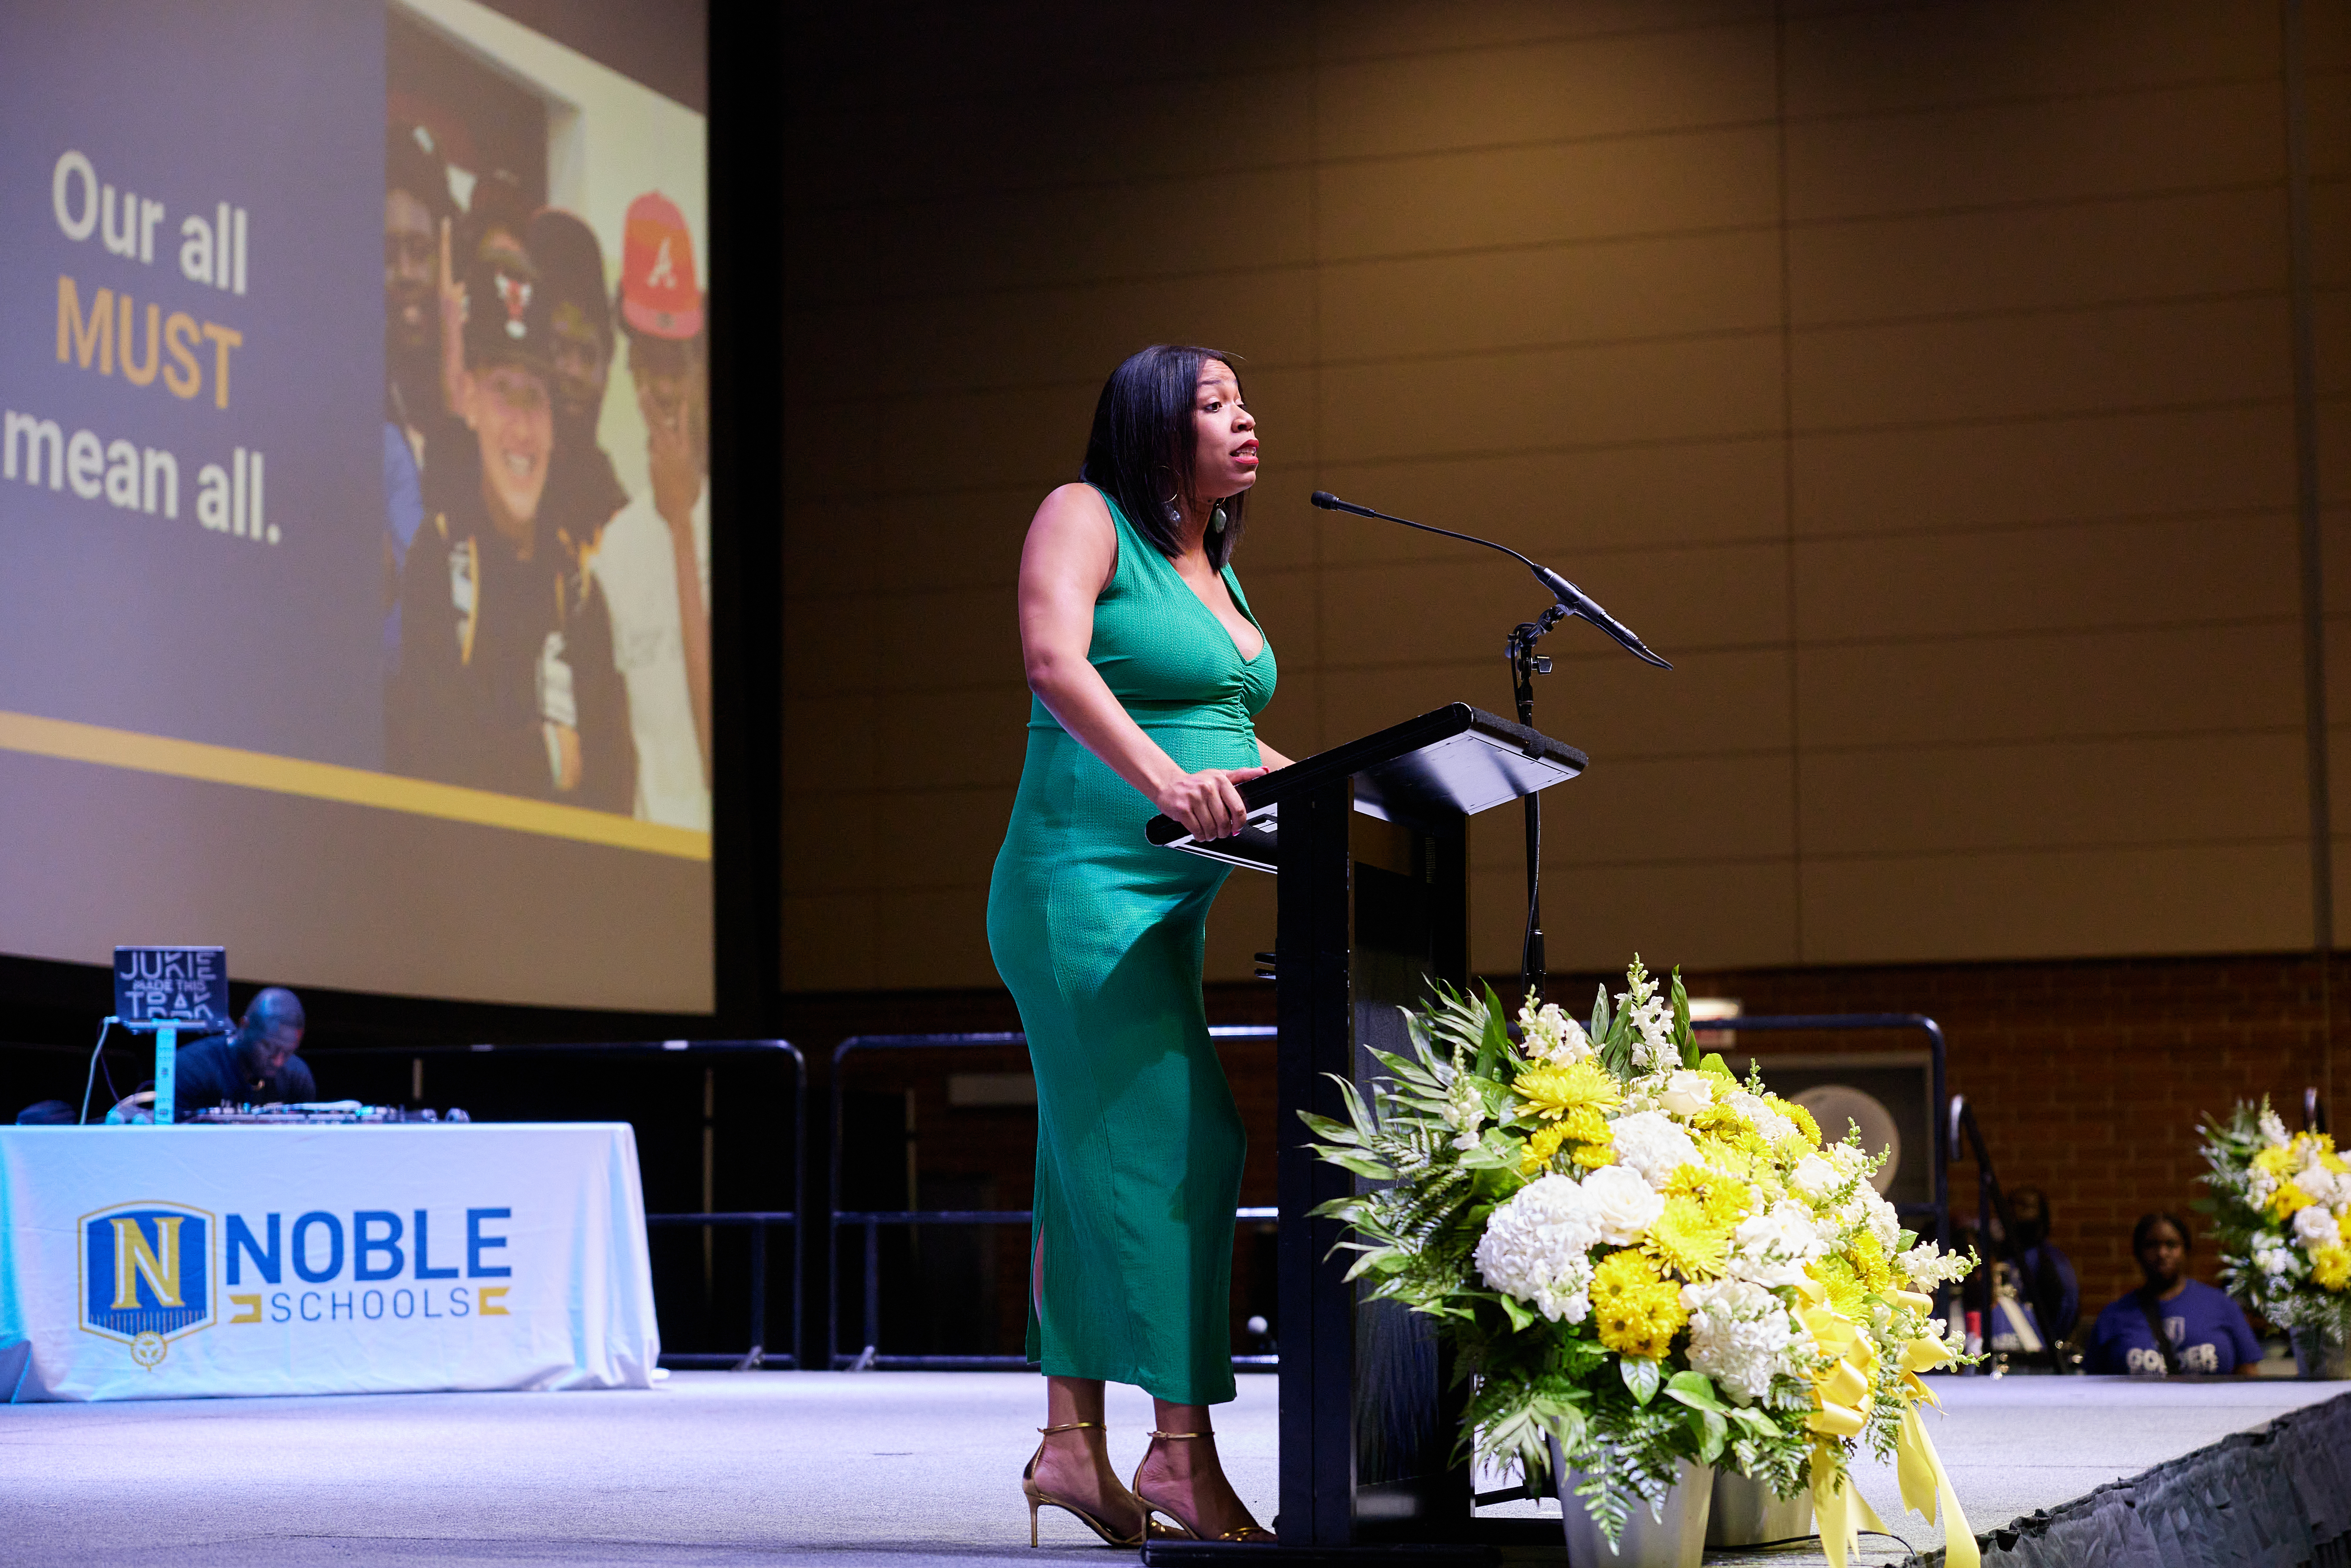 Photo shows a full body shot of Jennifer Reid Davis, the Head of Equity and Strategy at Noble Schools, as she addresses the crowd on stage at the podium. Behind her is a projector screen that has a photo of Chicago Bulls College Prep students next to words that read "Our all MUST mean all".